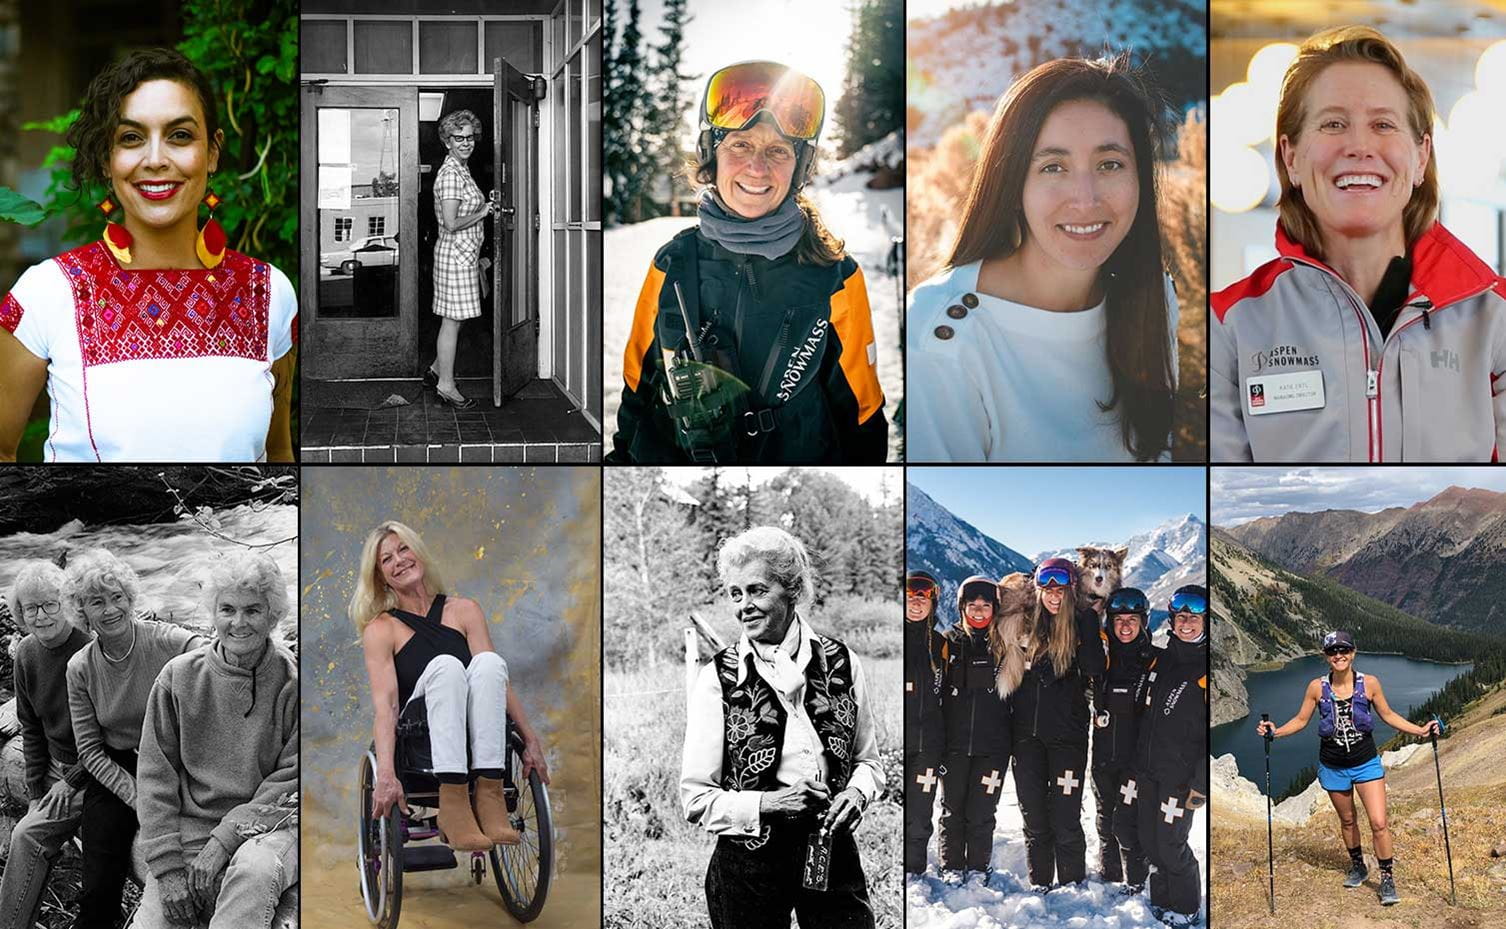 Ladies of the Valley – Women's History Month in the Roaring Fork Valley